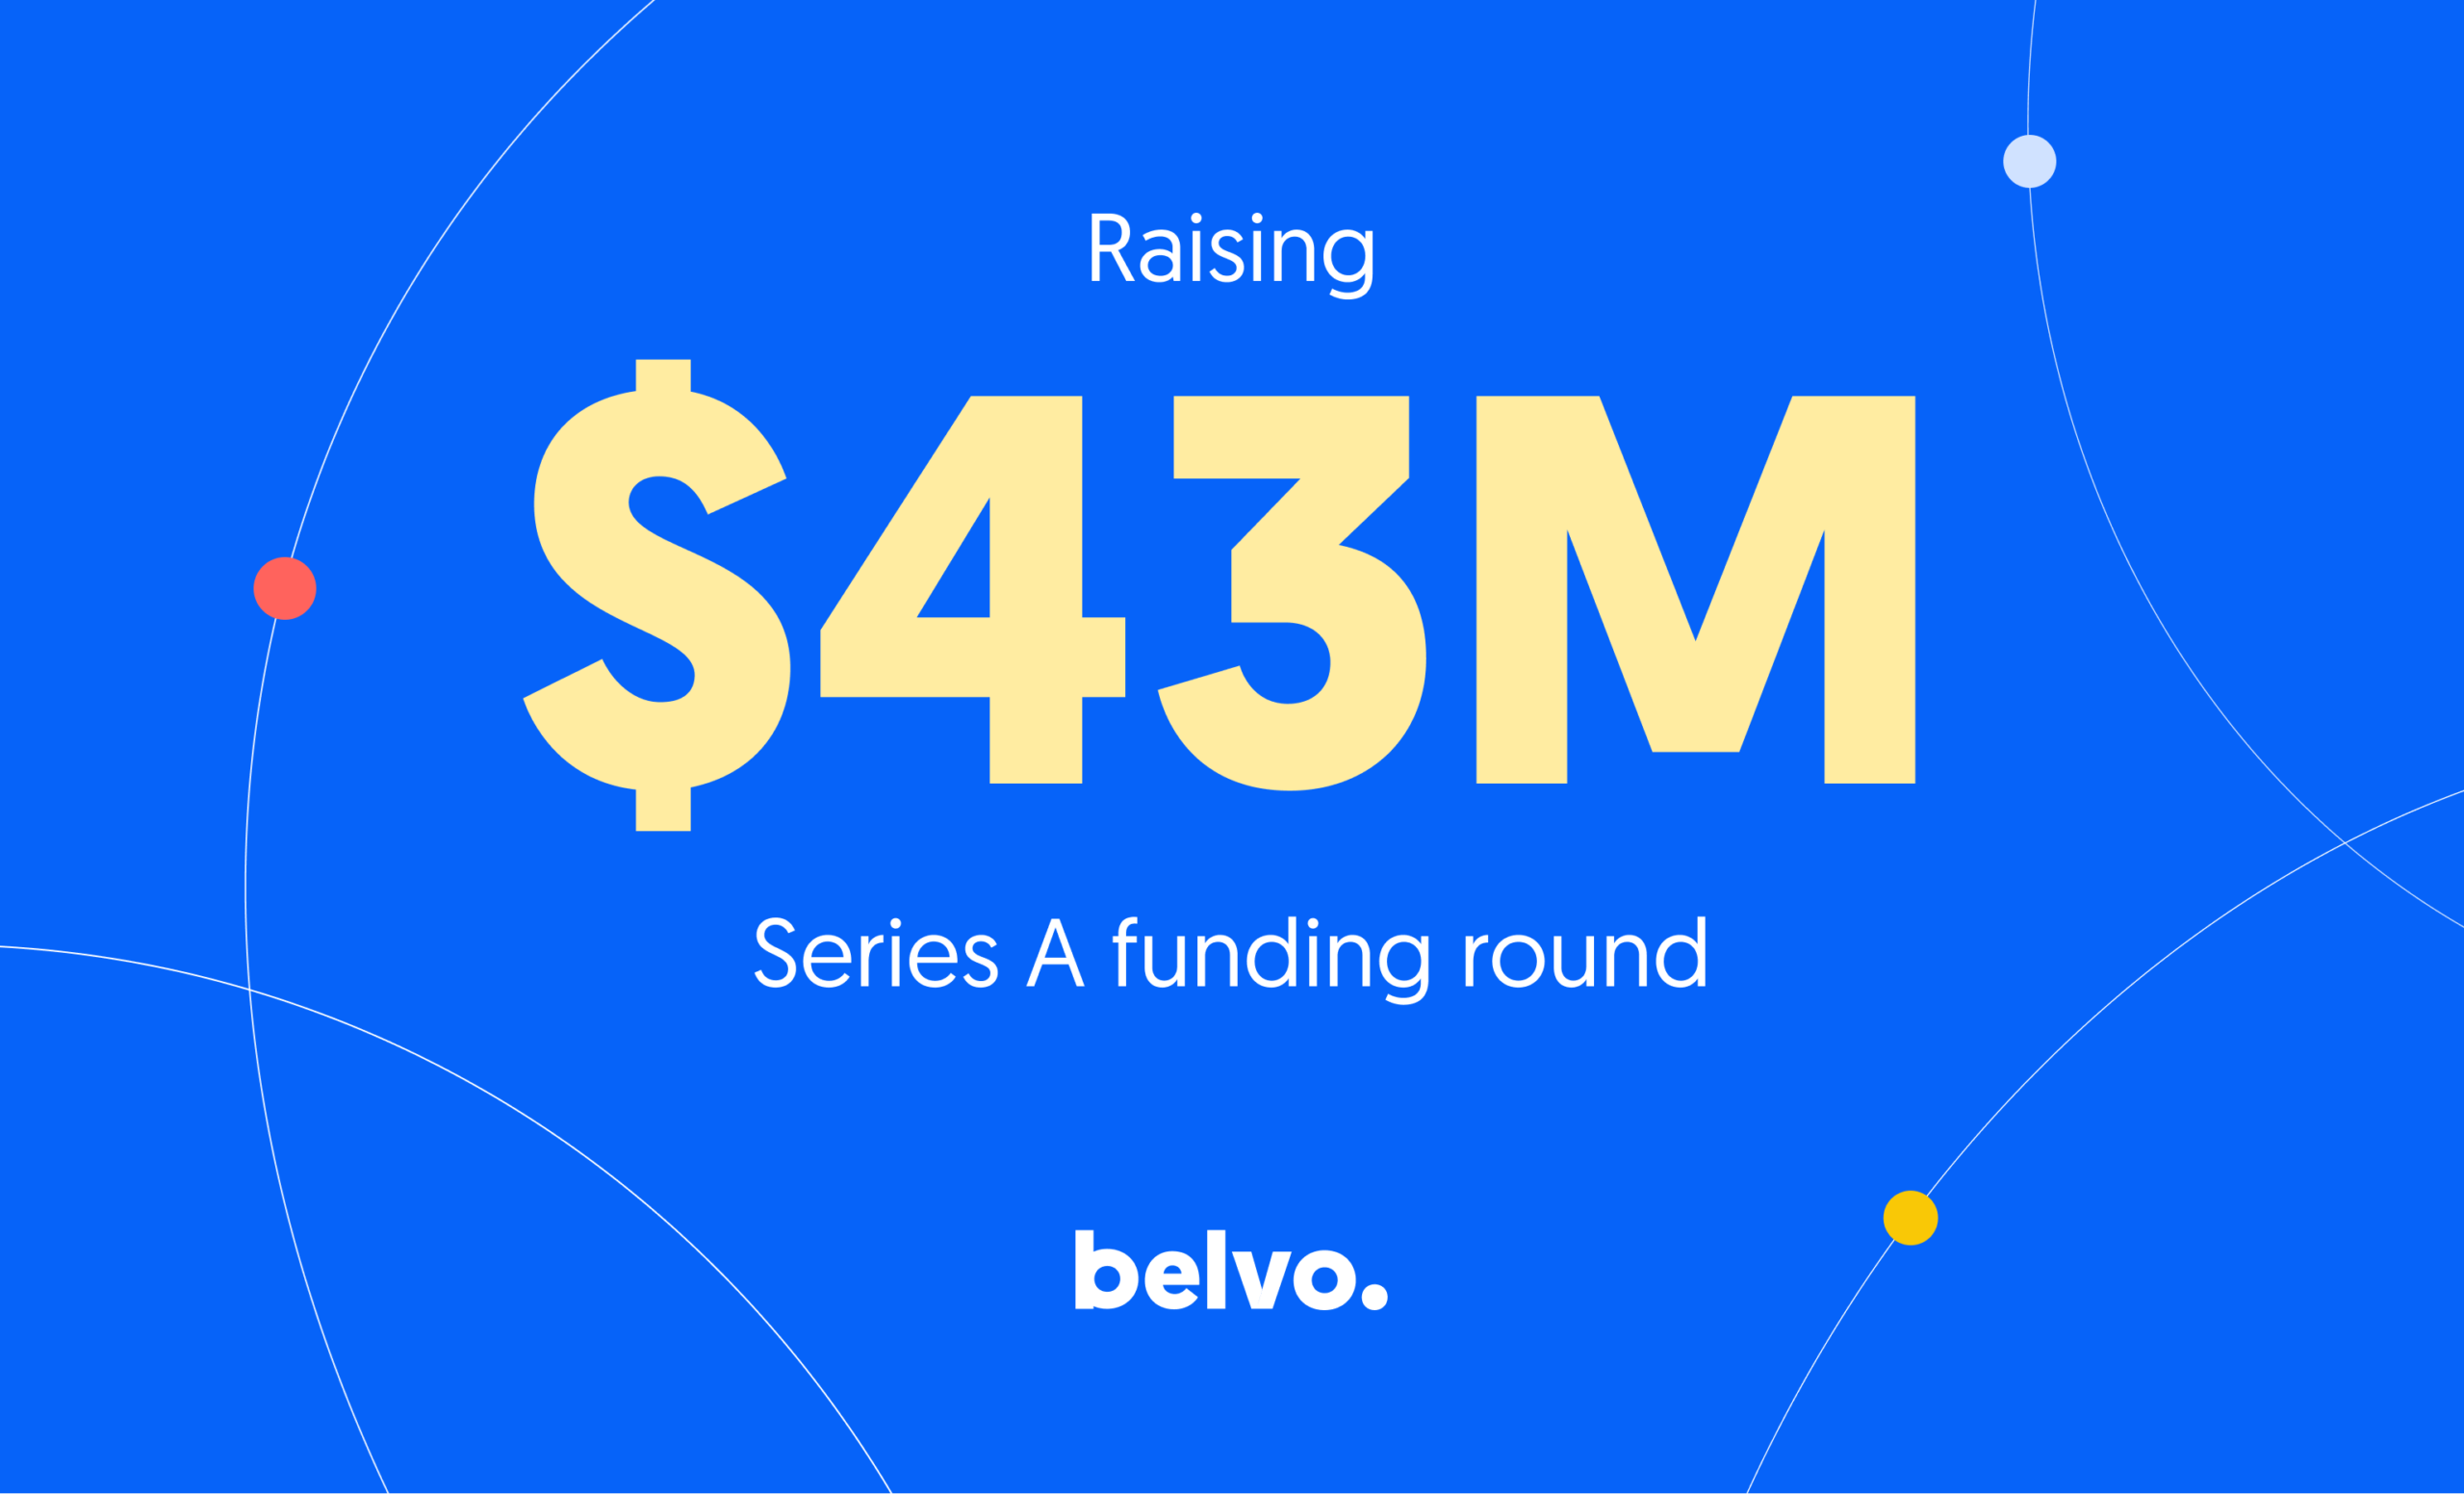 Series A funding